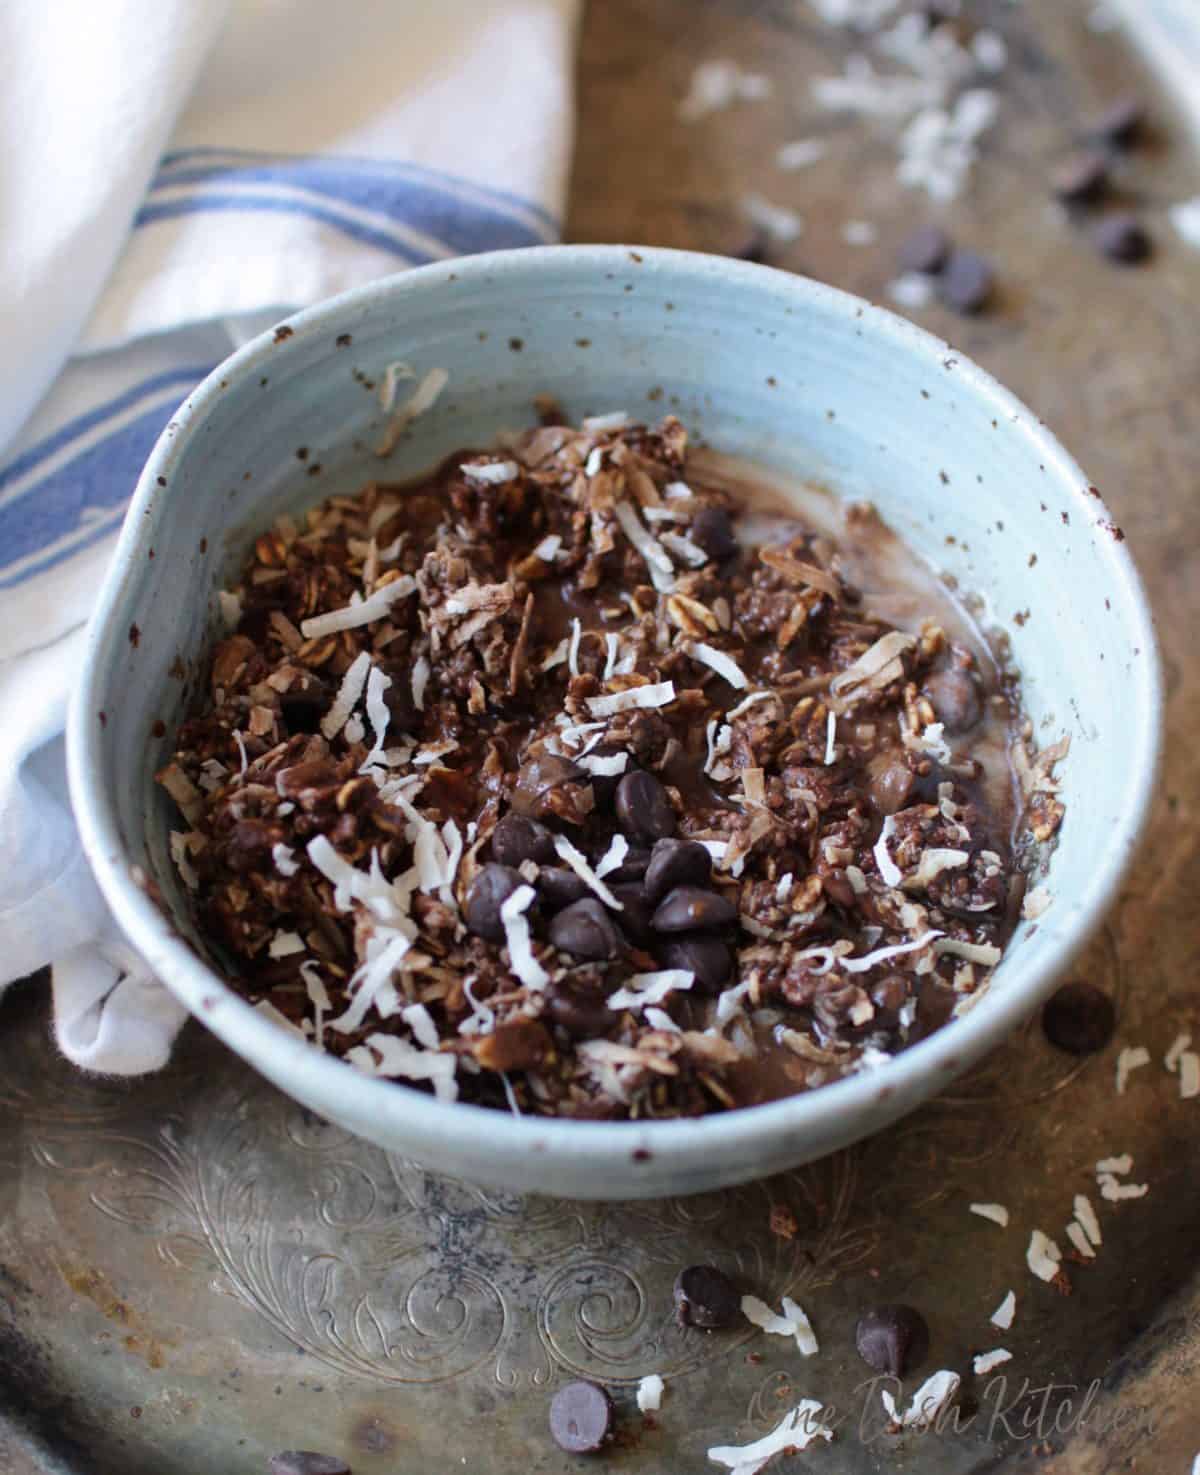 Oatmeal bowl made with chocolate and topped with coconut shavings on a metal